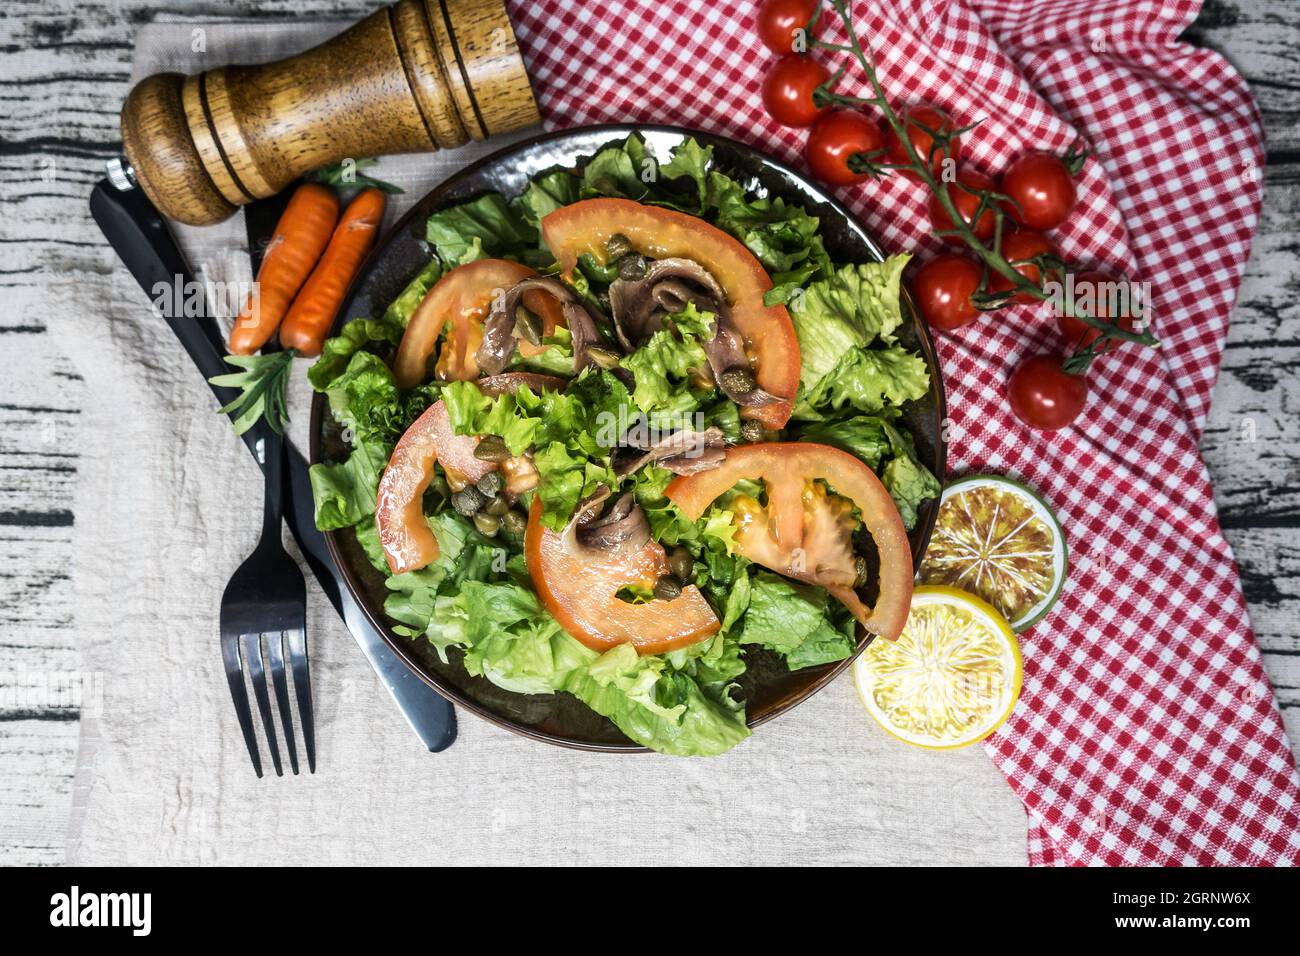 High Angle View Of Salad In Plate On Table Stock Photo